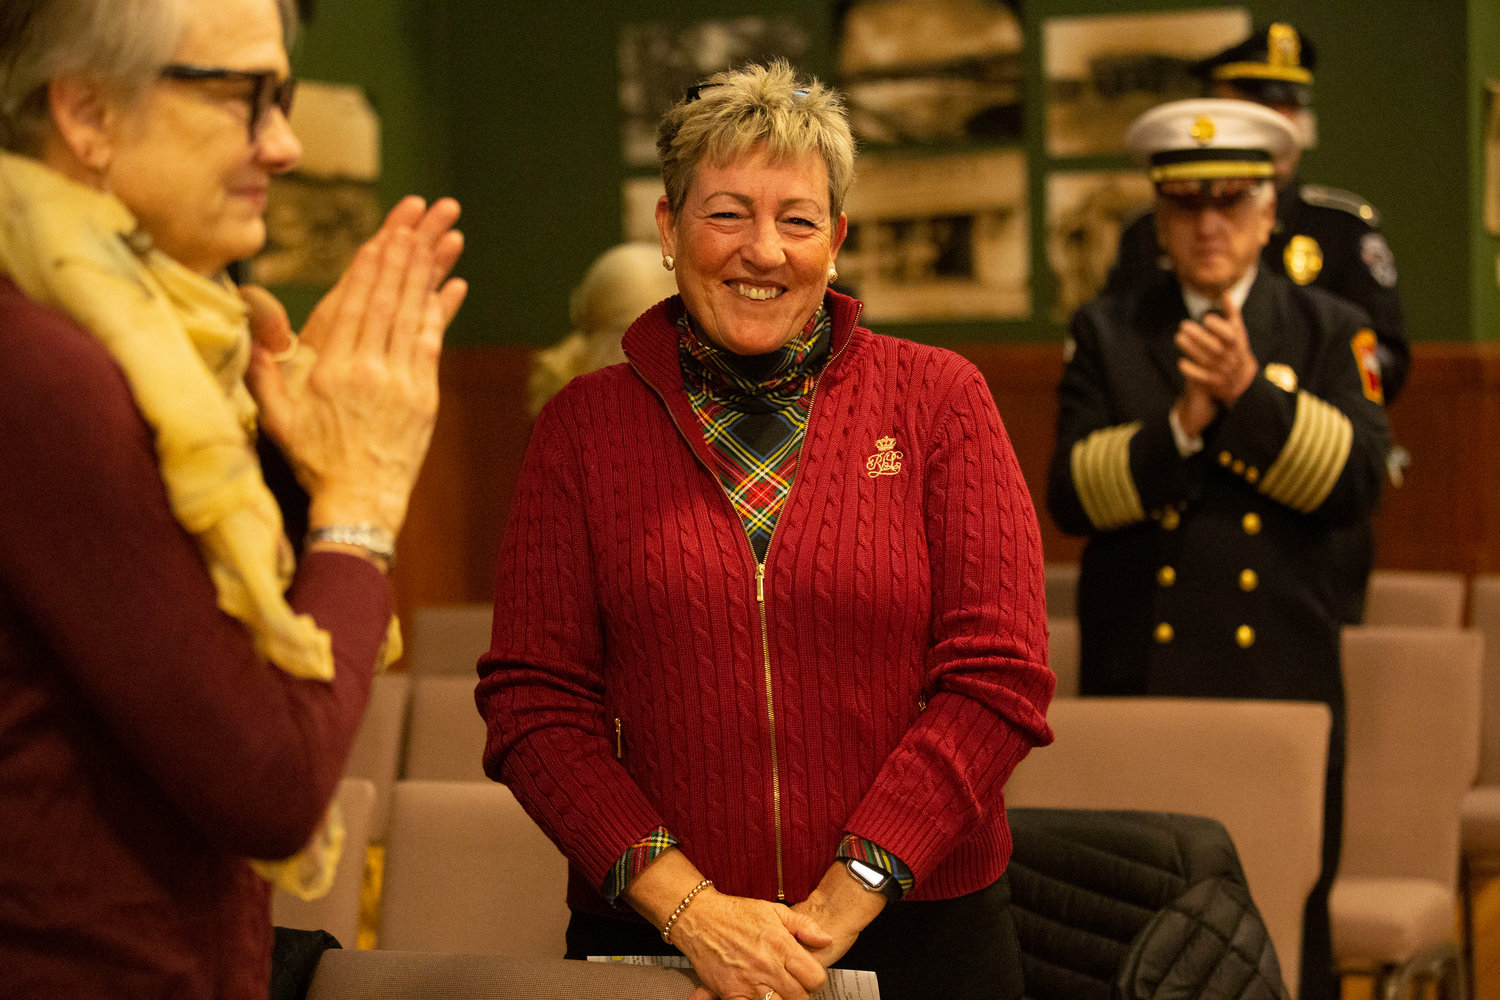 Cynthia Coyne receives a round of applause for her years of service during a special meeting at the town hall on Monday night, Dec. 5. Coyne has served as the District 32 Senator since 2014. She stepped down this year, and her seat will be filled by fellow Barrington resident Pam Lauria.